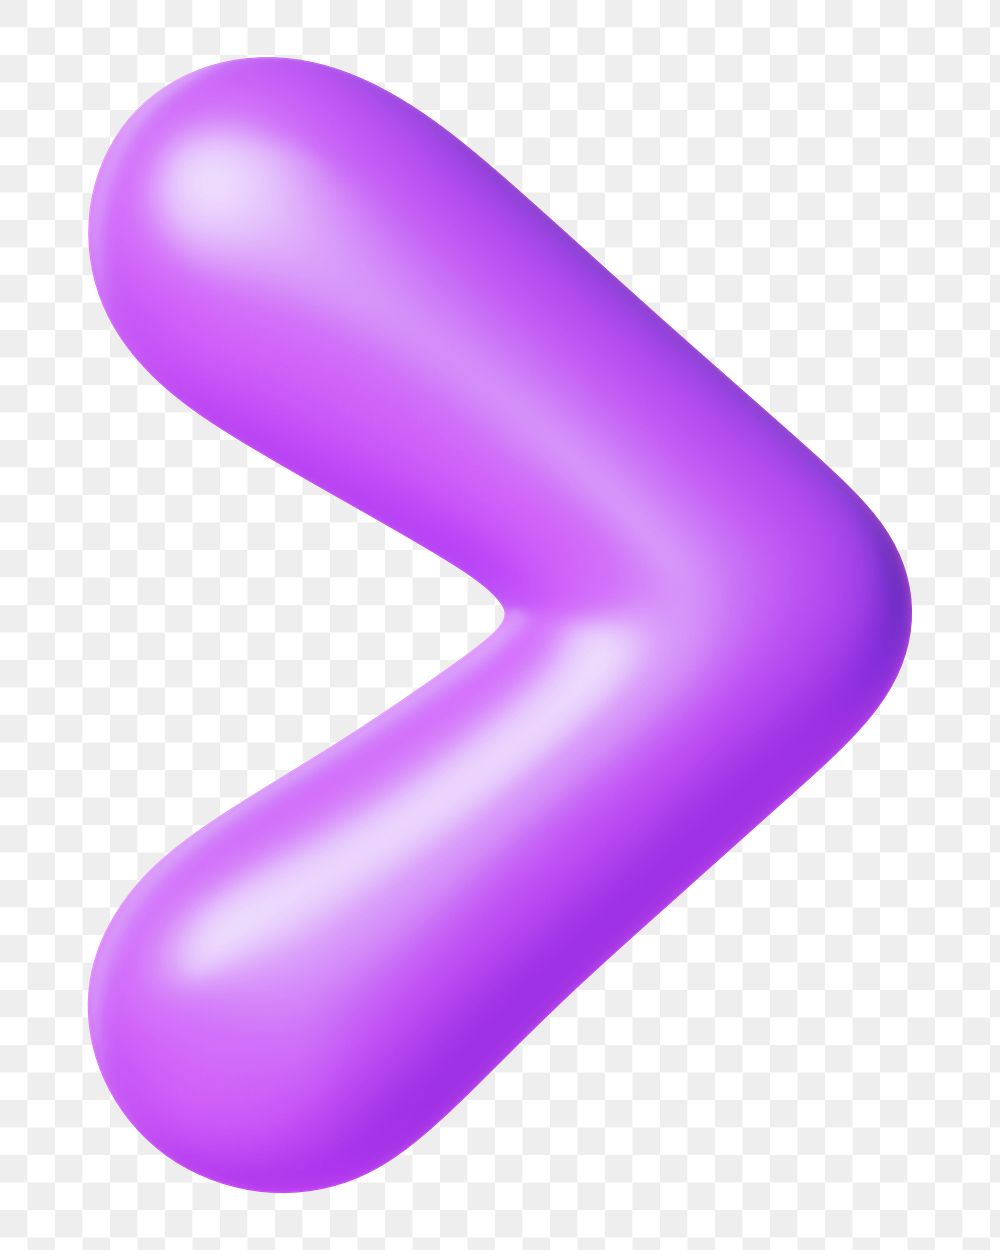 Greater than png 3D purple symbol, transparent background